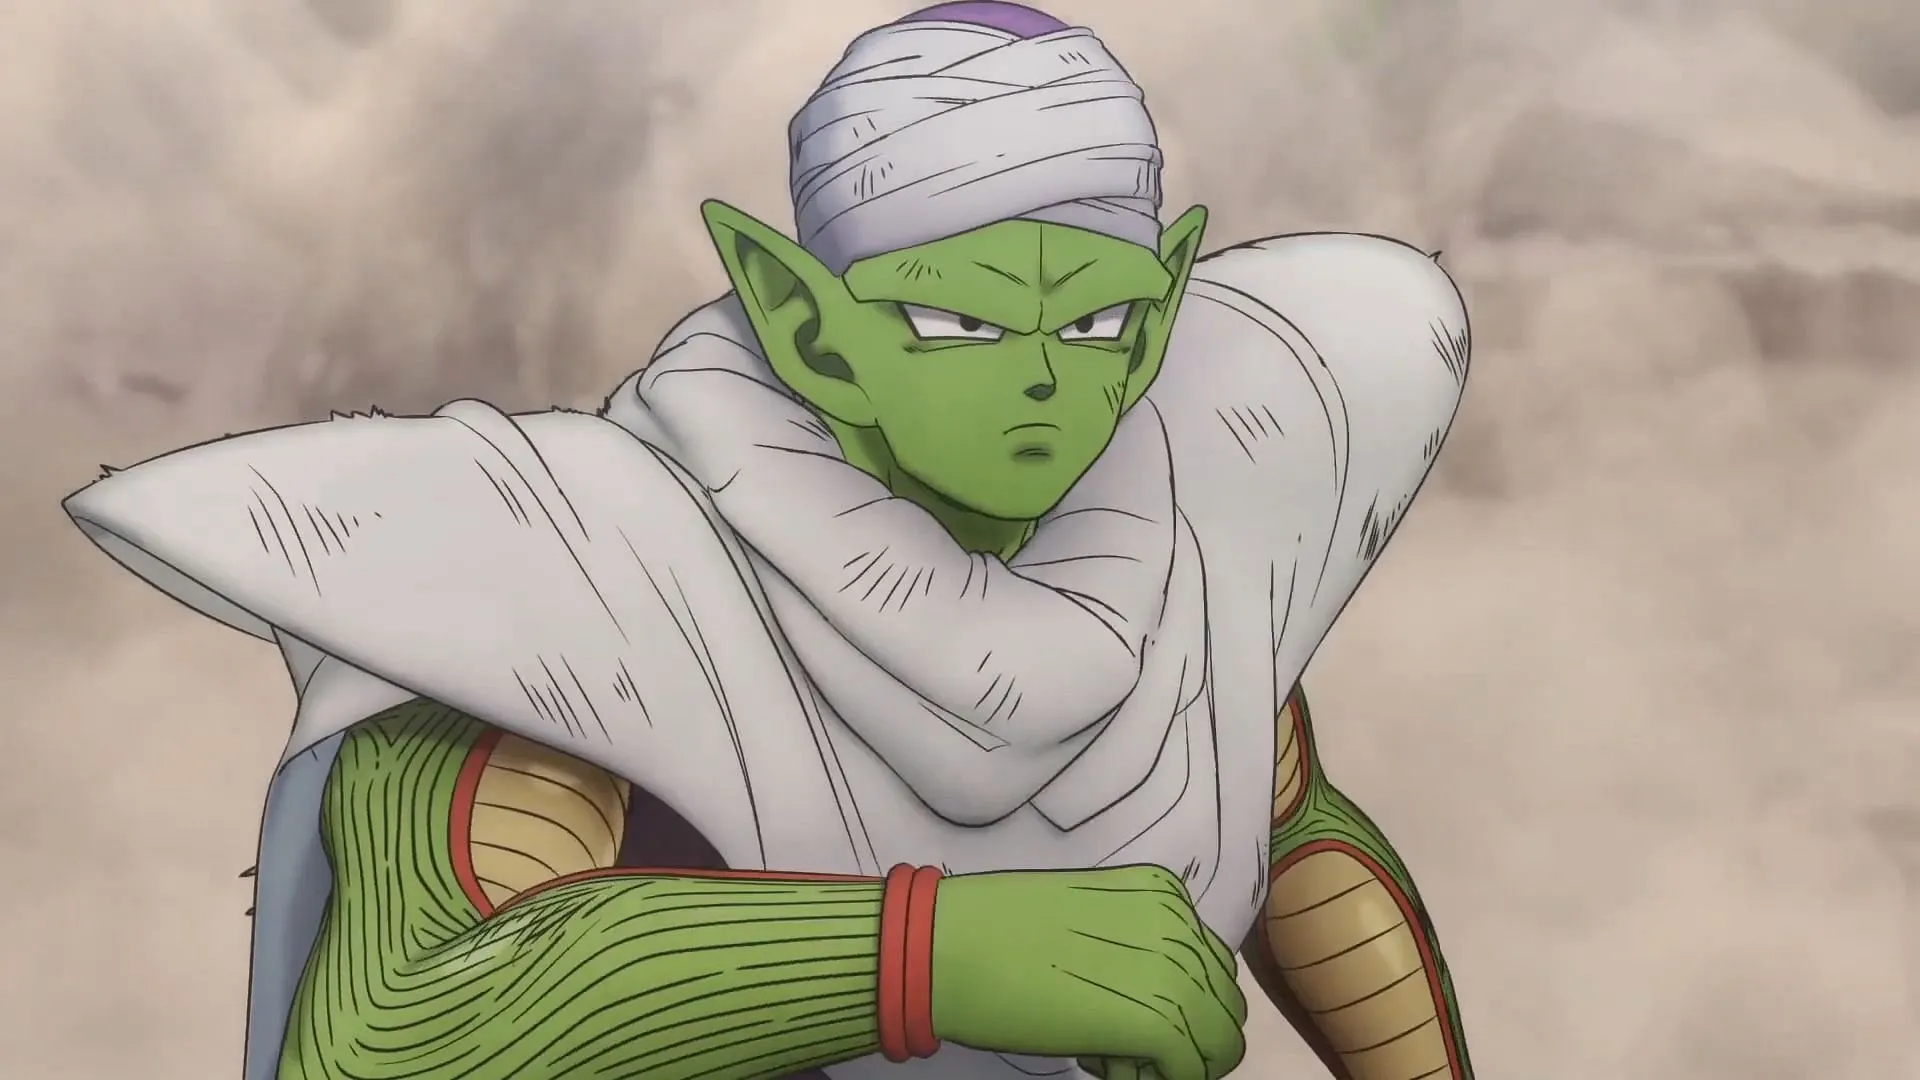 Piccolo as seen in the Dragon Ball anime series (Image via Toei Animation)